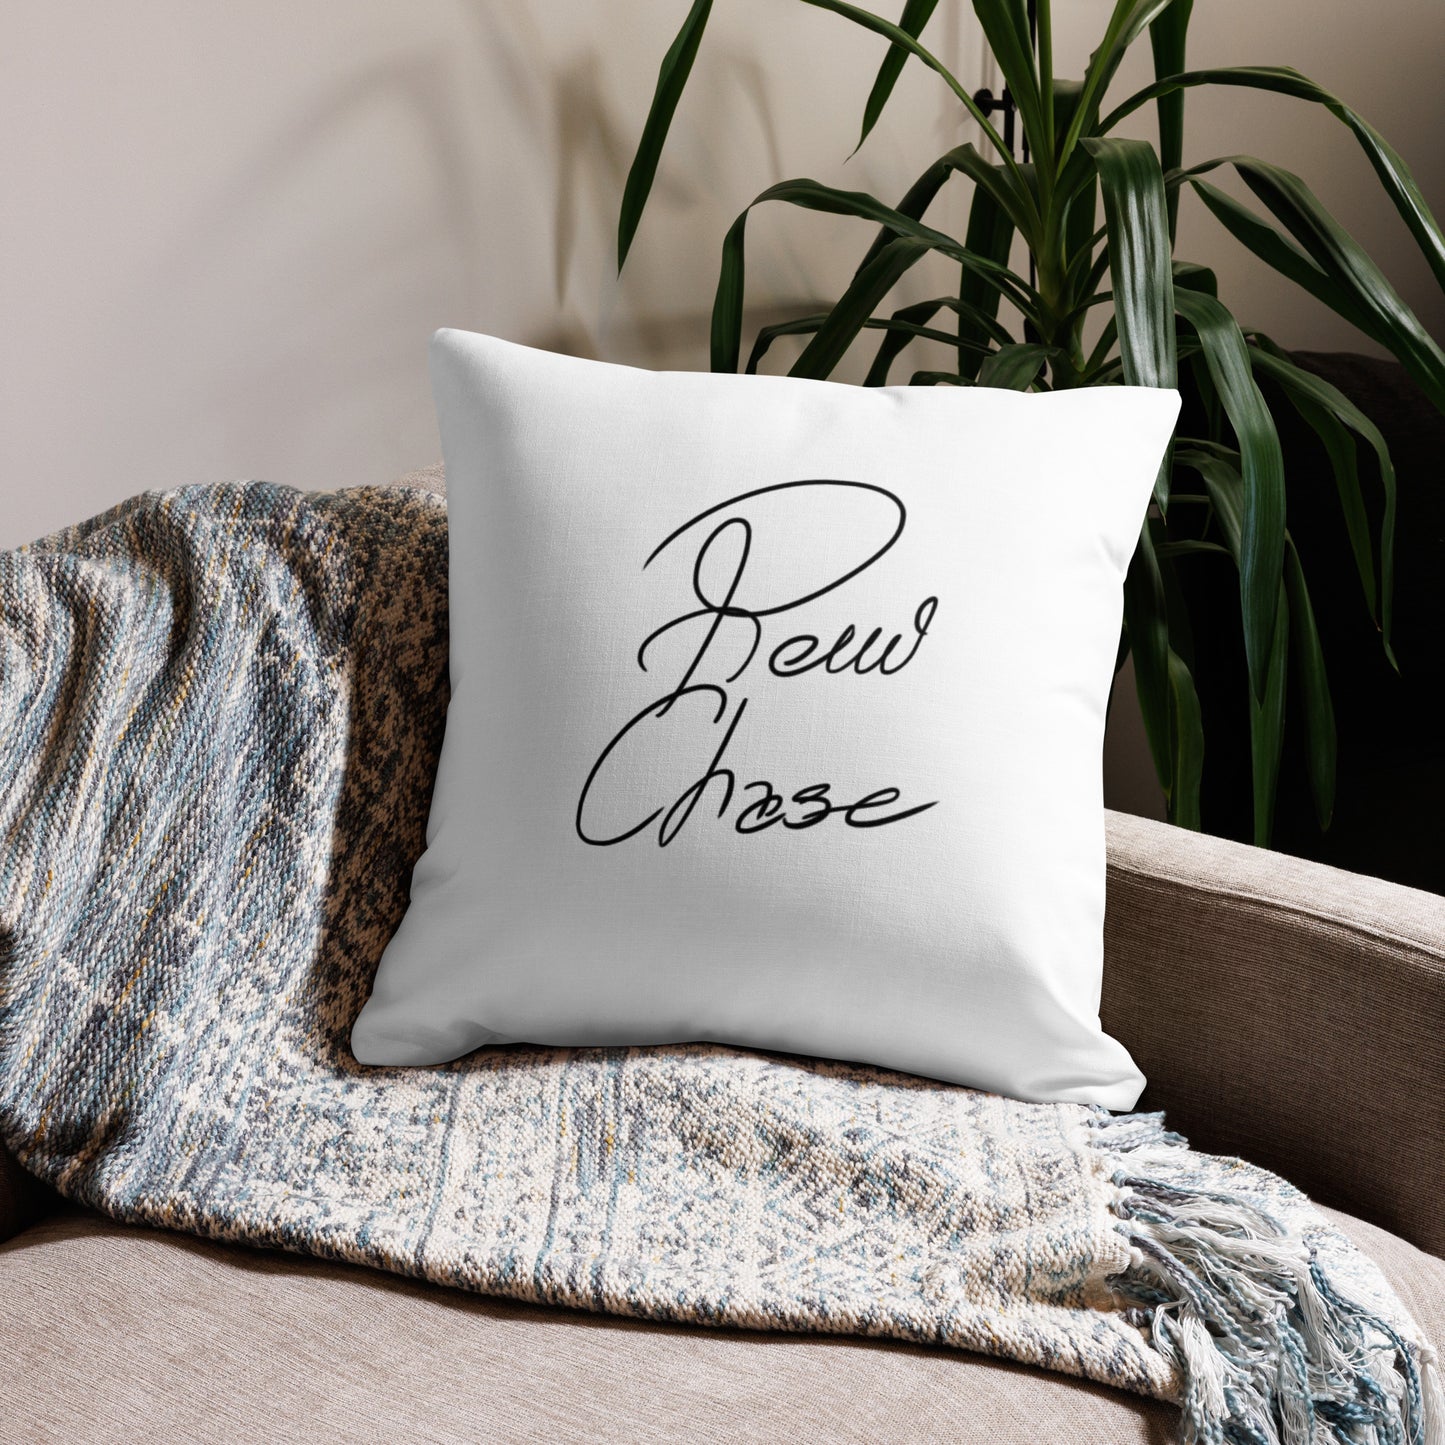 Premium Pillow w/ Inspiring Quote and Signature on back